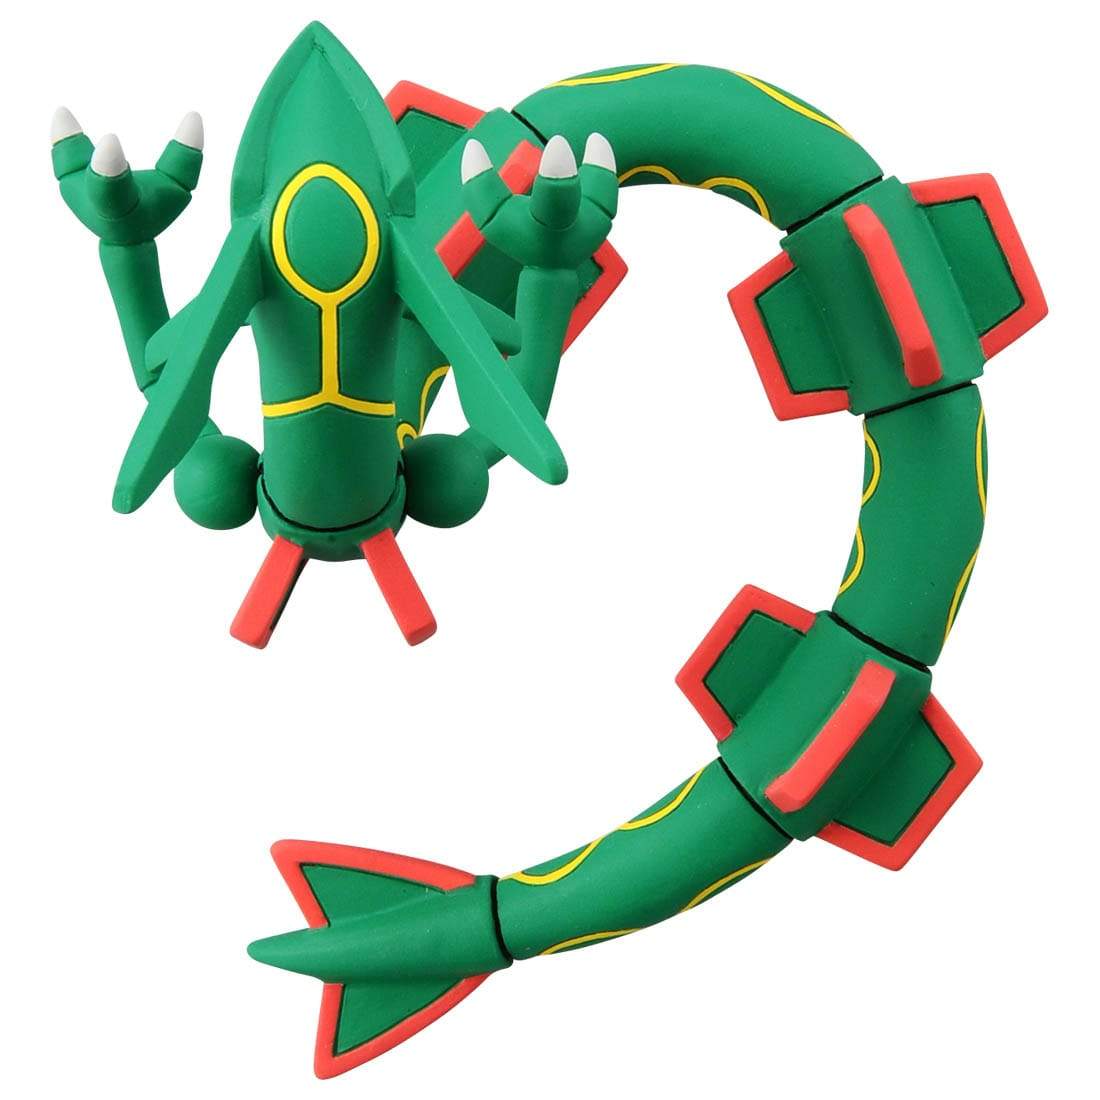 Pokemon Moncolle &quot;Rayquaza &quot; (ML-05)-Takara Tomy-Ace Cards &amp; Collectibles